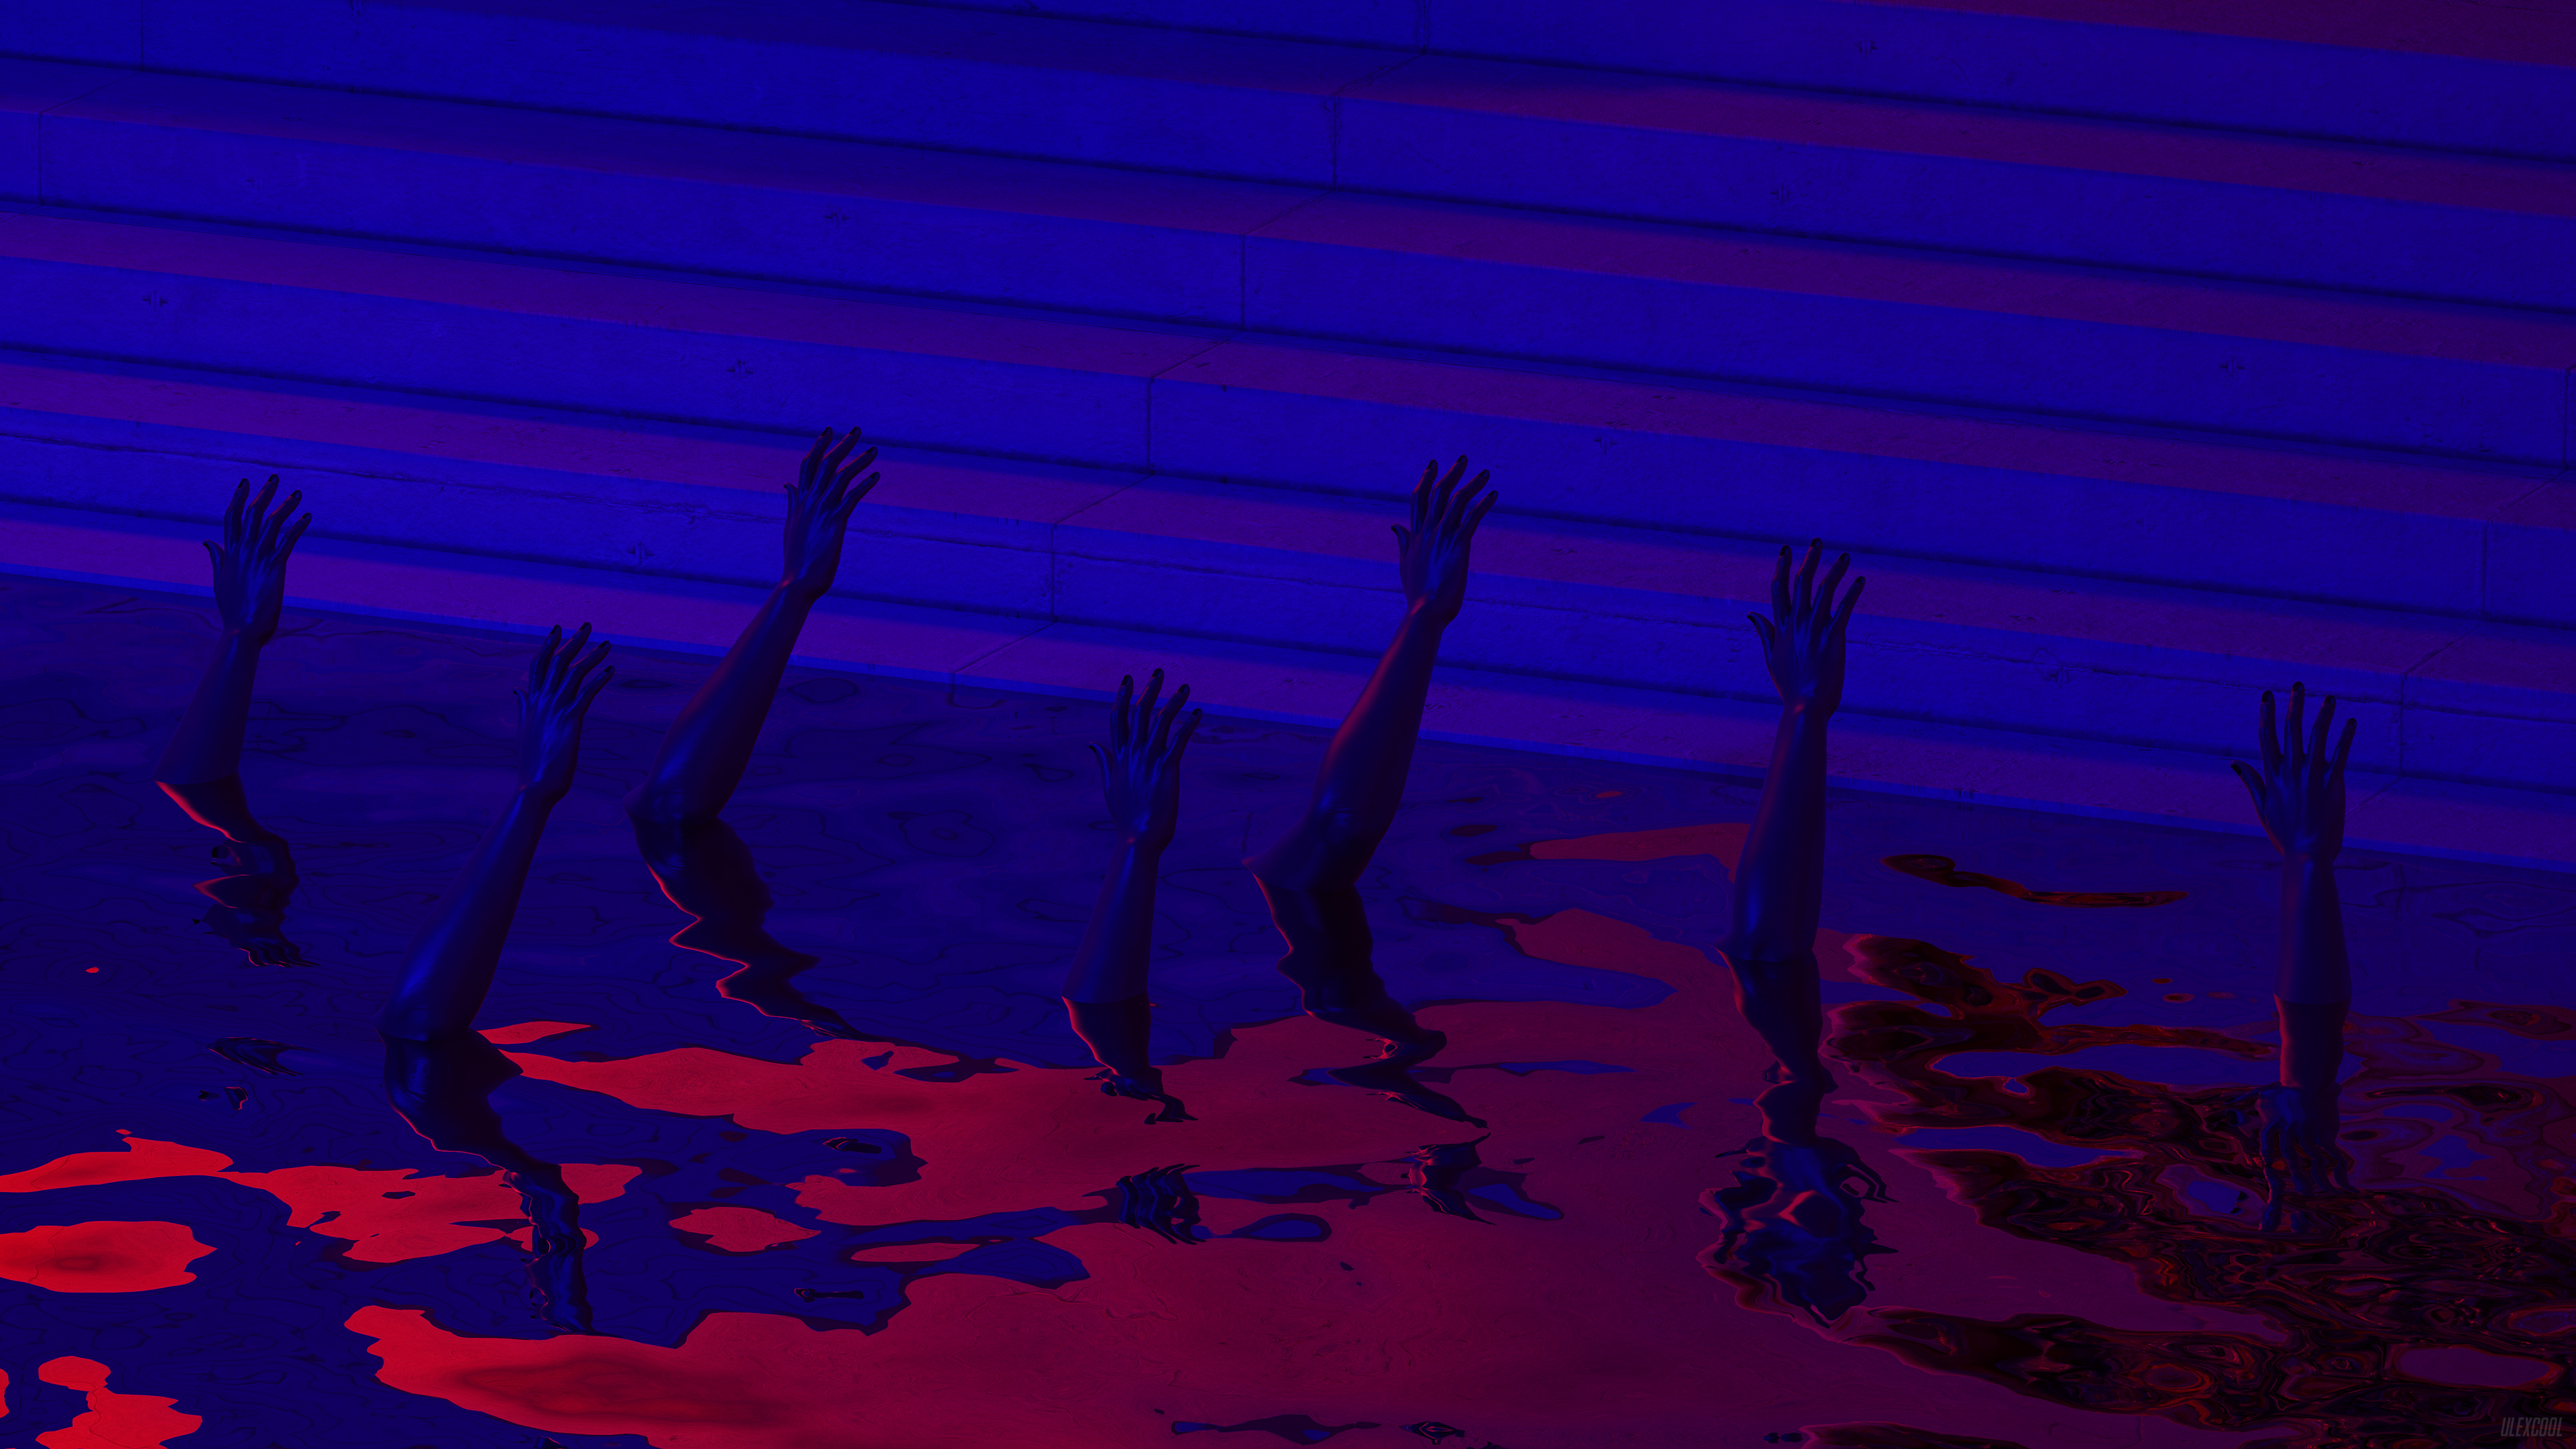 Neon Blue Red Water Hands Stairs Reflection Cult Cultist Arms Digital Art 3840x2160